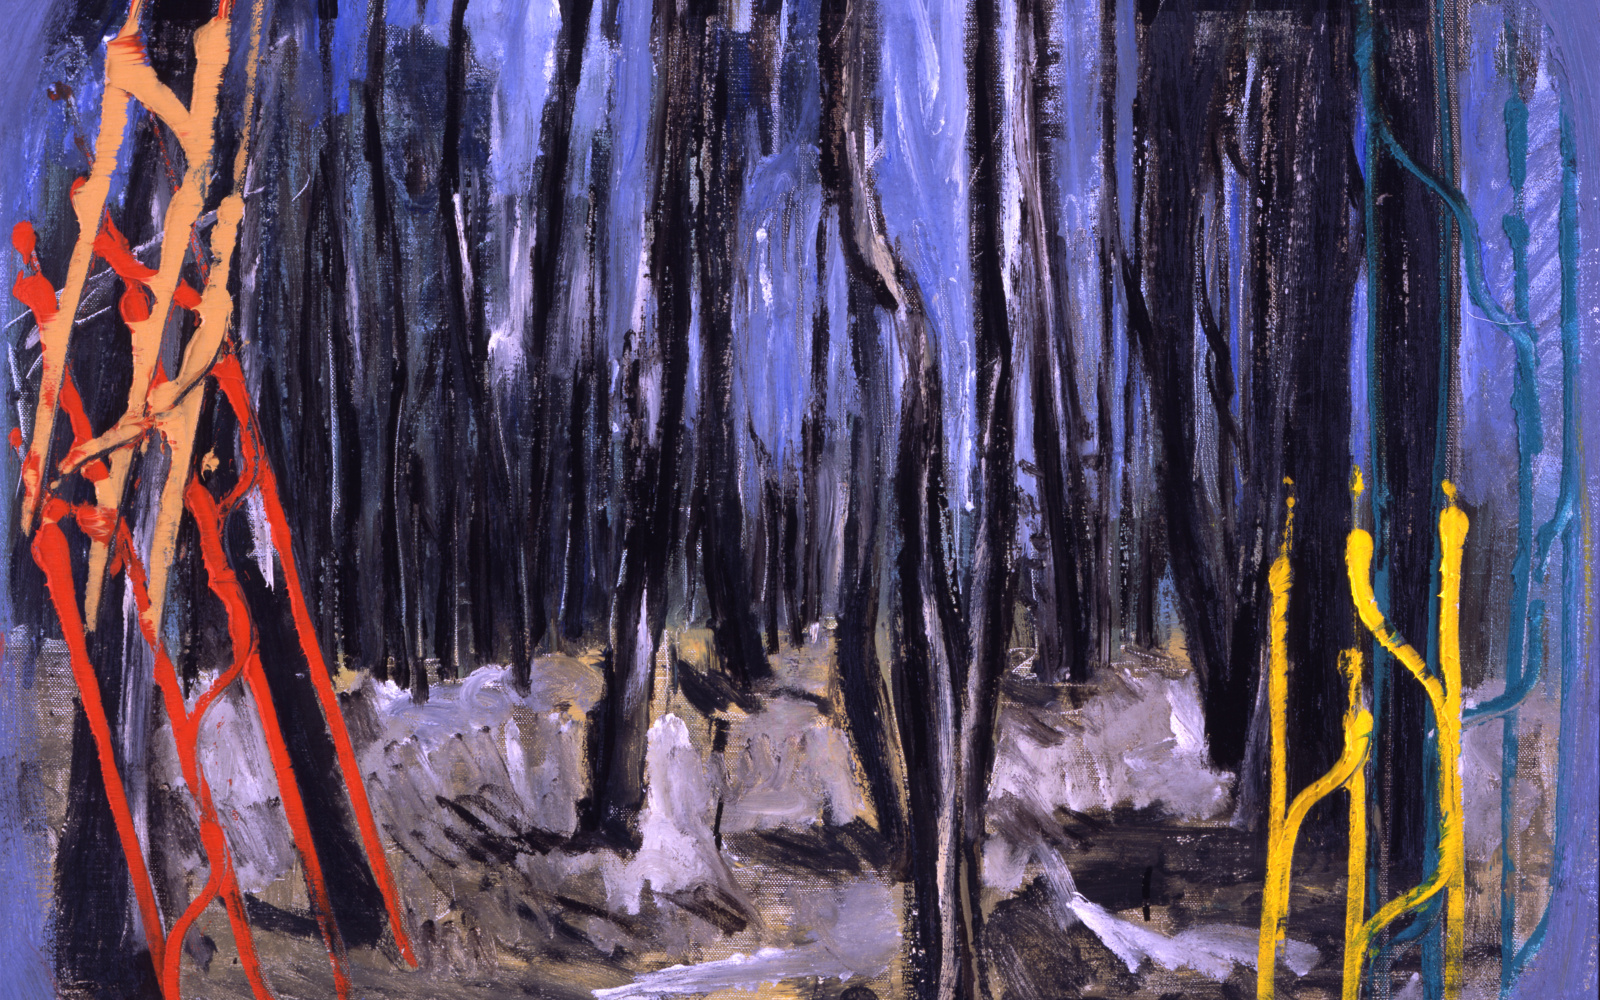 An abstract painting of a forrest in violet, yellow and red.